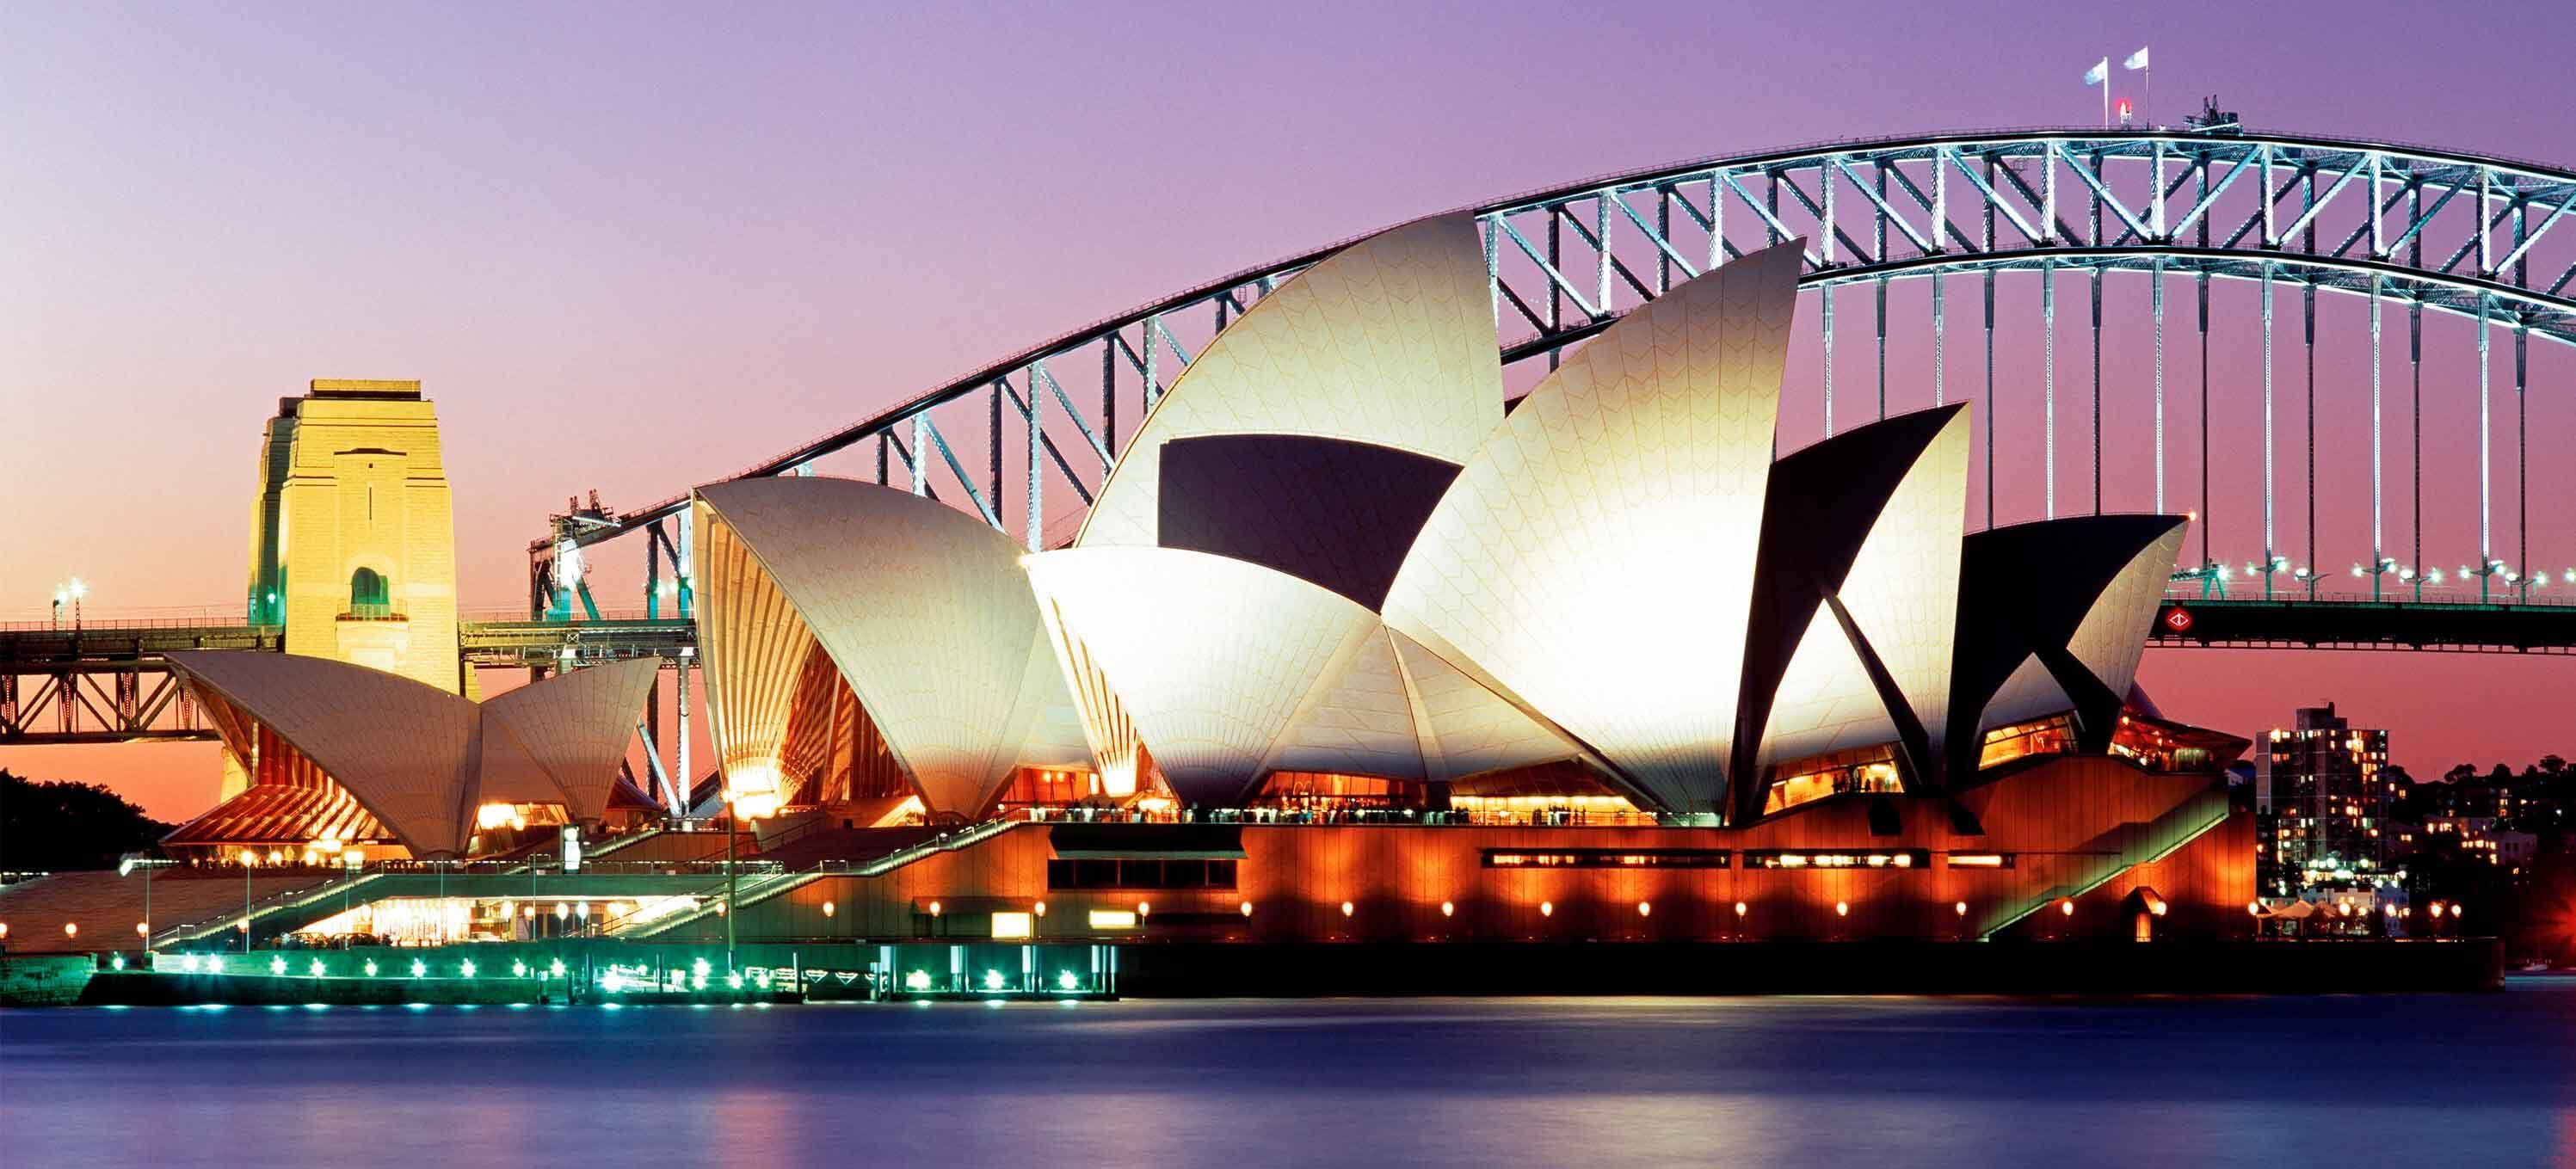 How to Find Cheap Flights to sydney